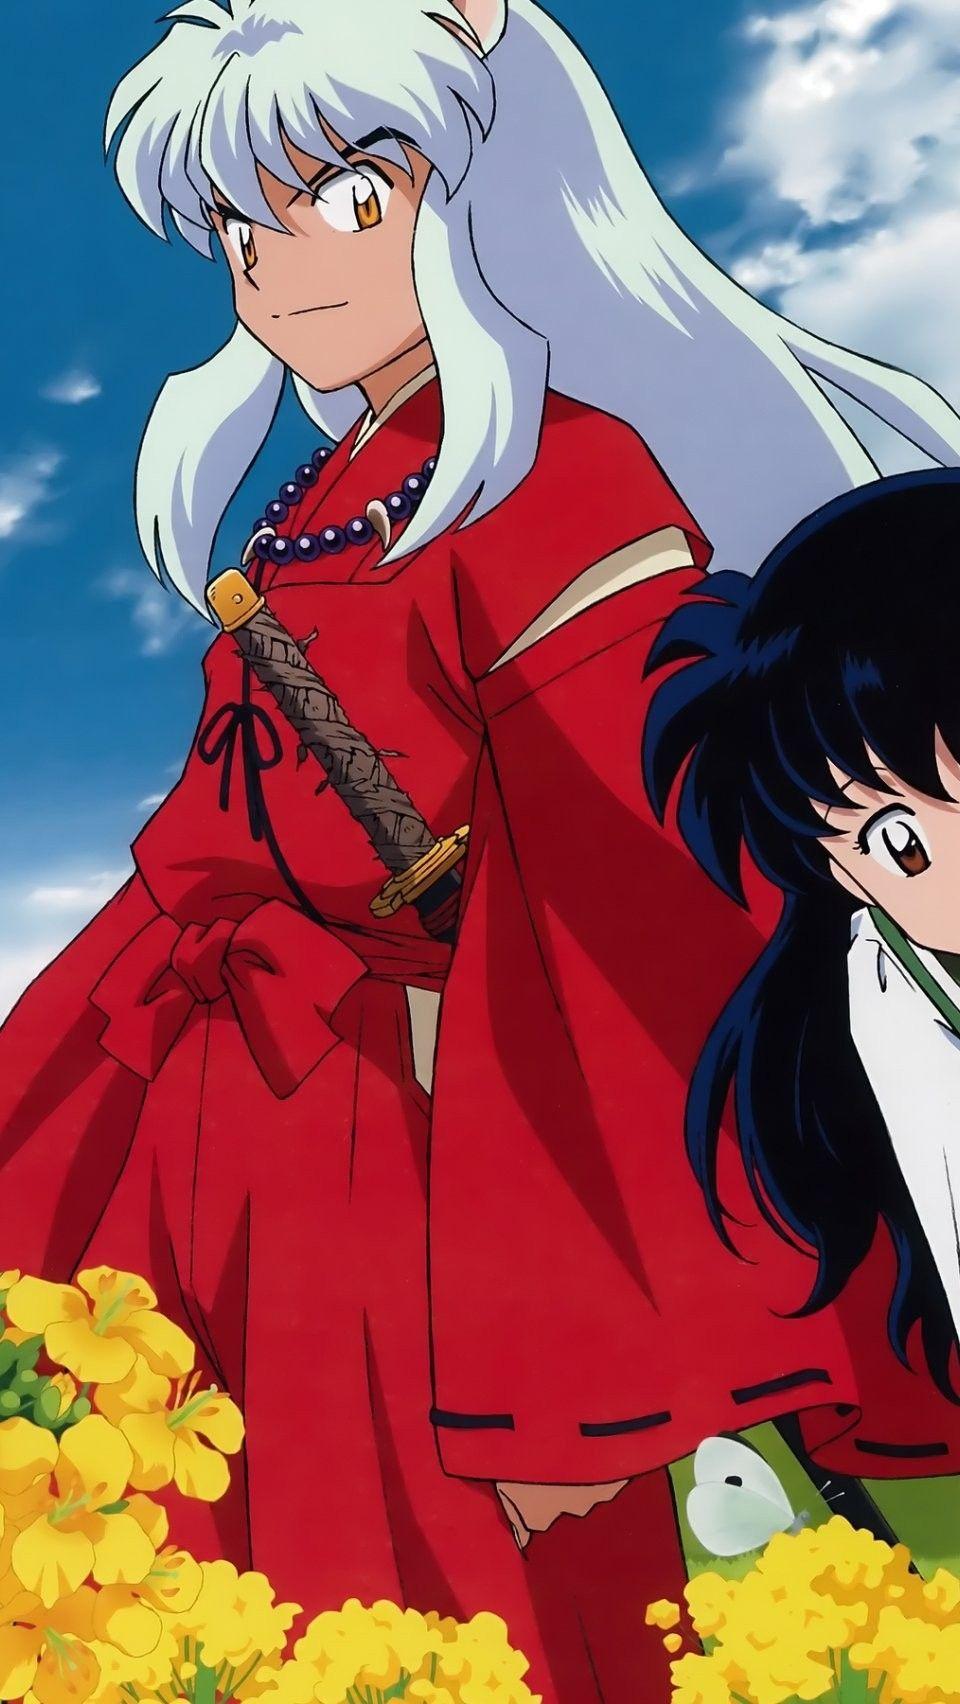 Inuyasha iPhone Wallpapers - Top Free Inuyasha iPhone Backgrounds ...